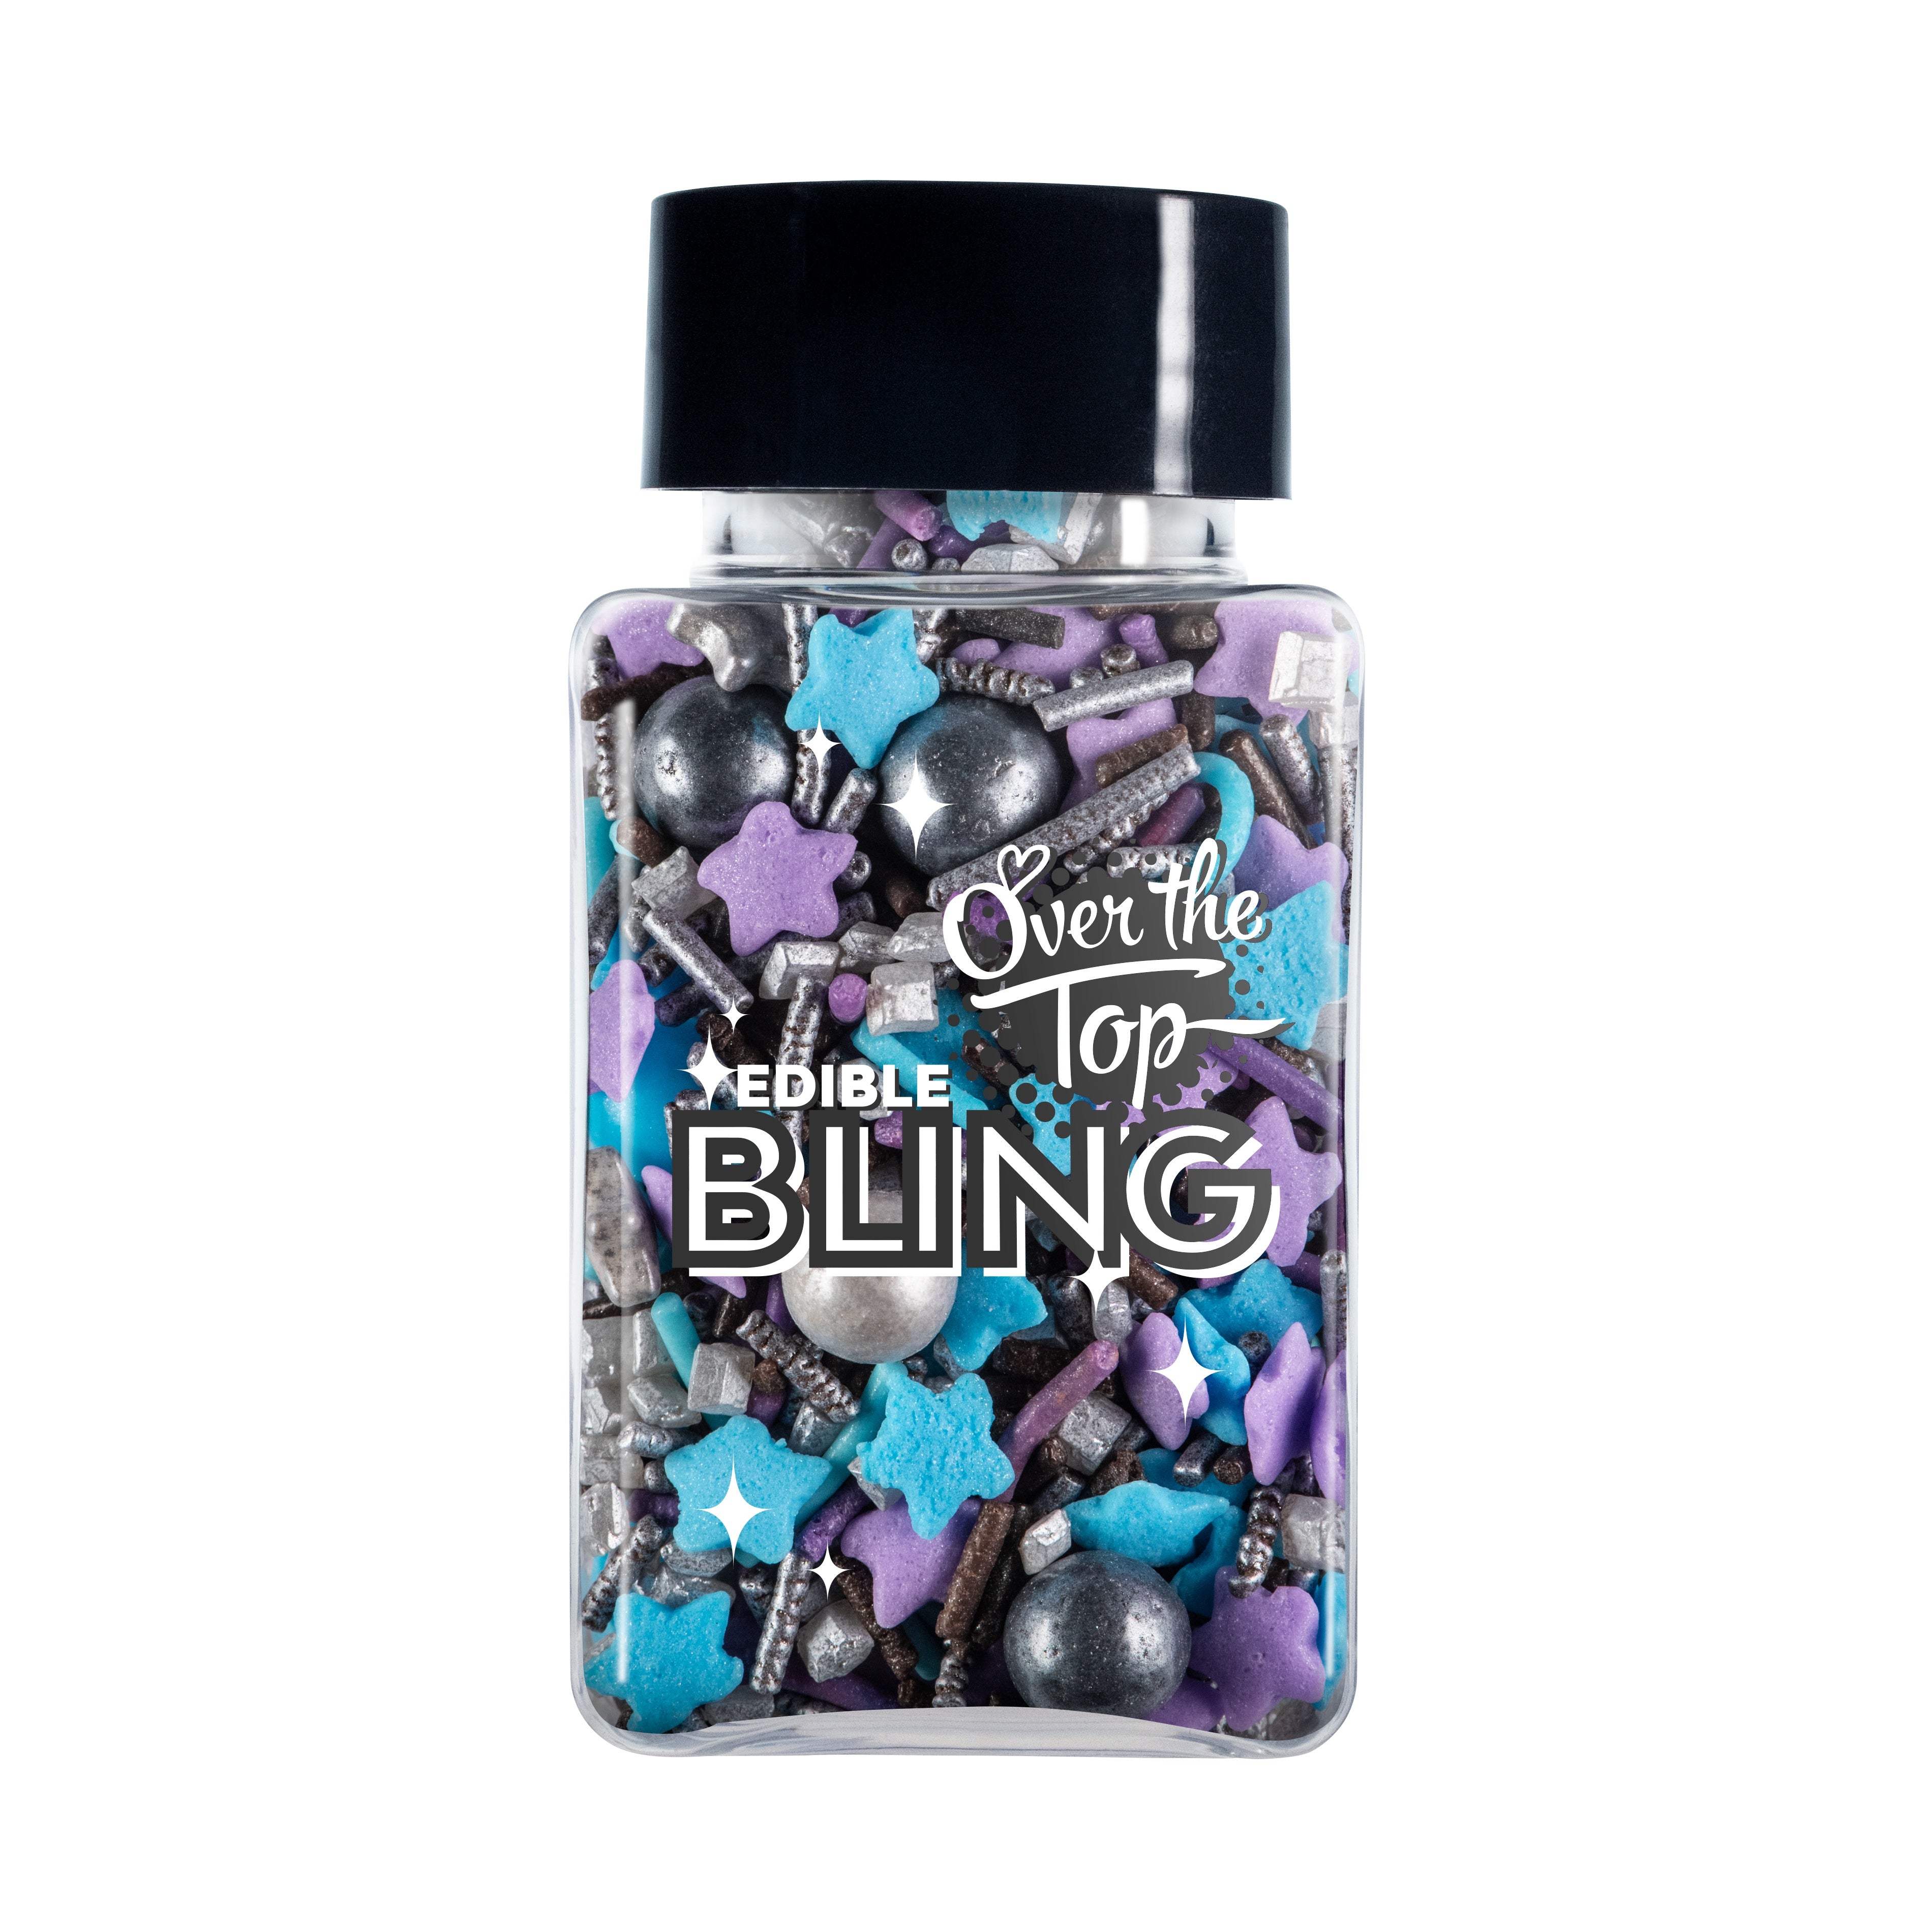 Over The Top Edible Bling Sprinkles - Galaxy Mix 60g